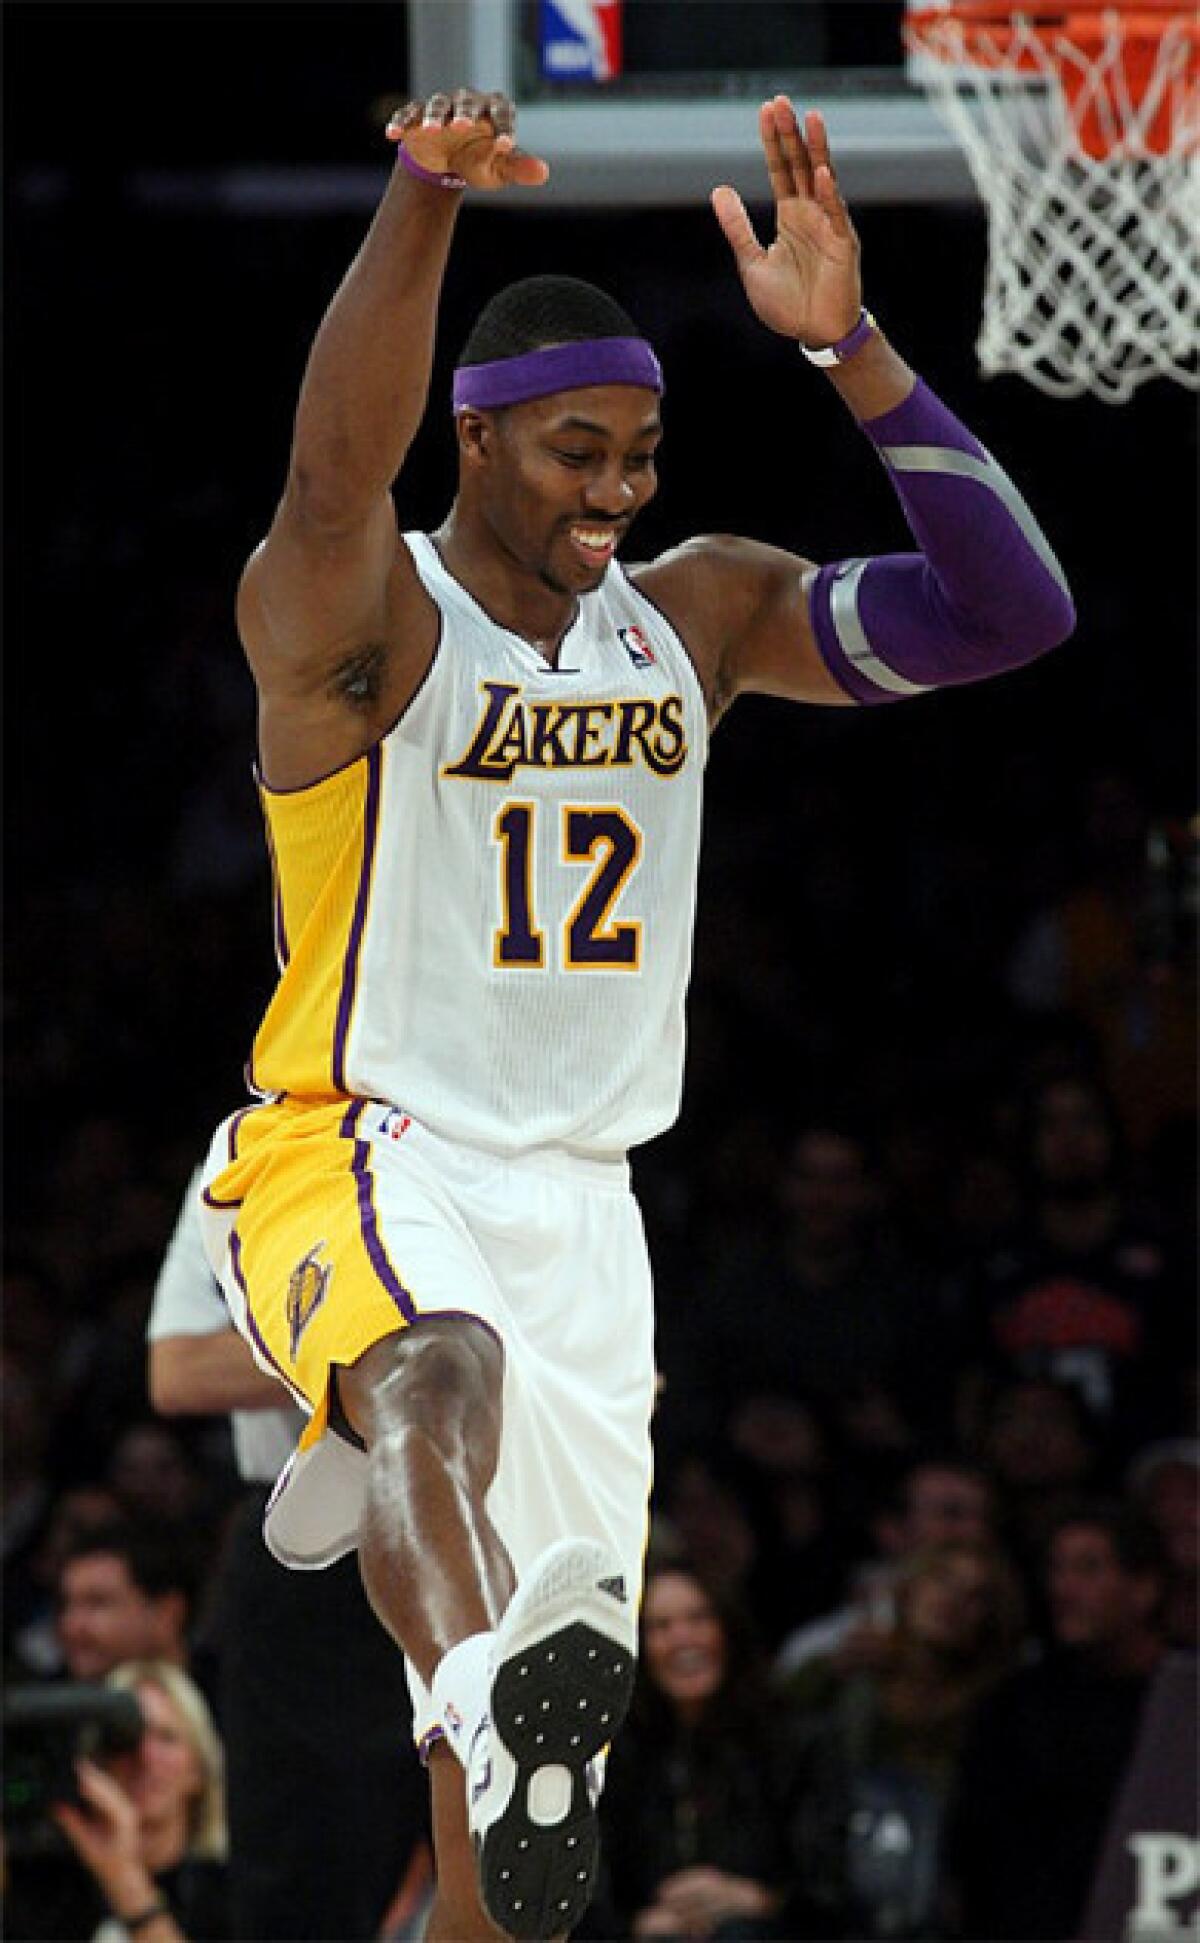 Dwight Howard celebrates after throwing down the dunk.